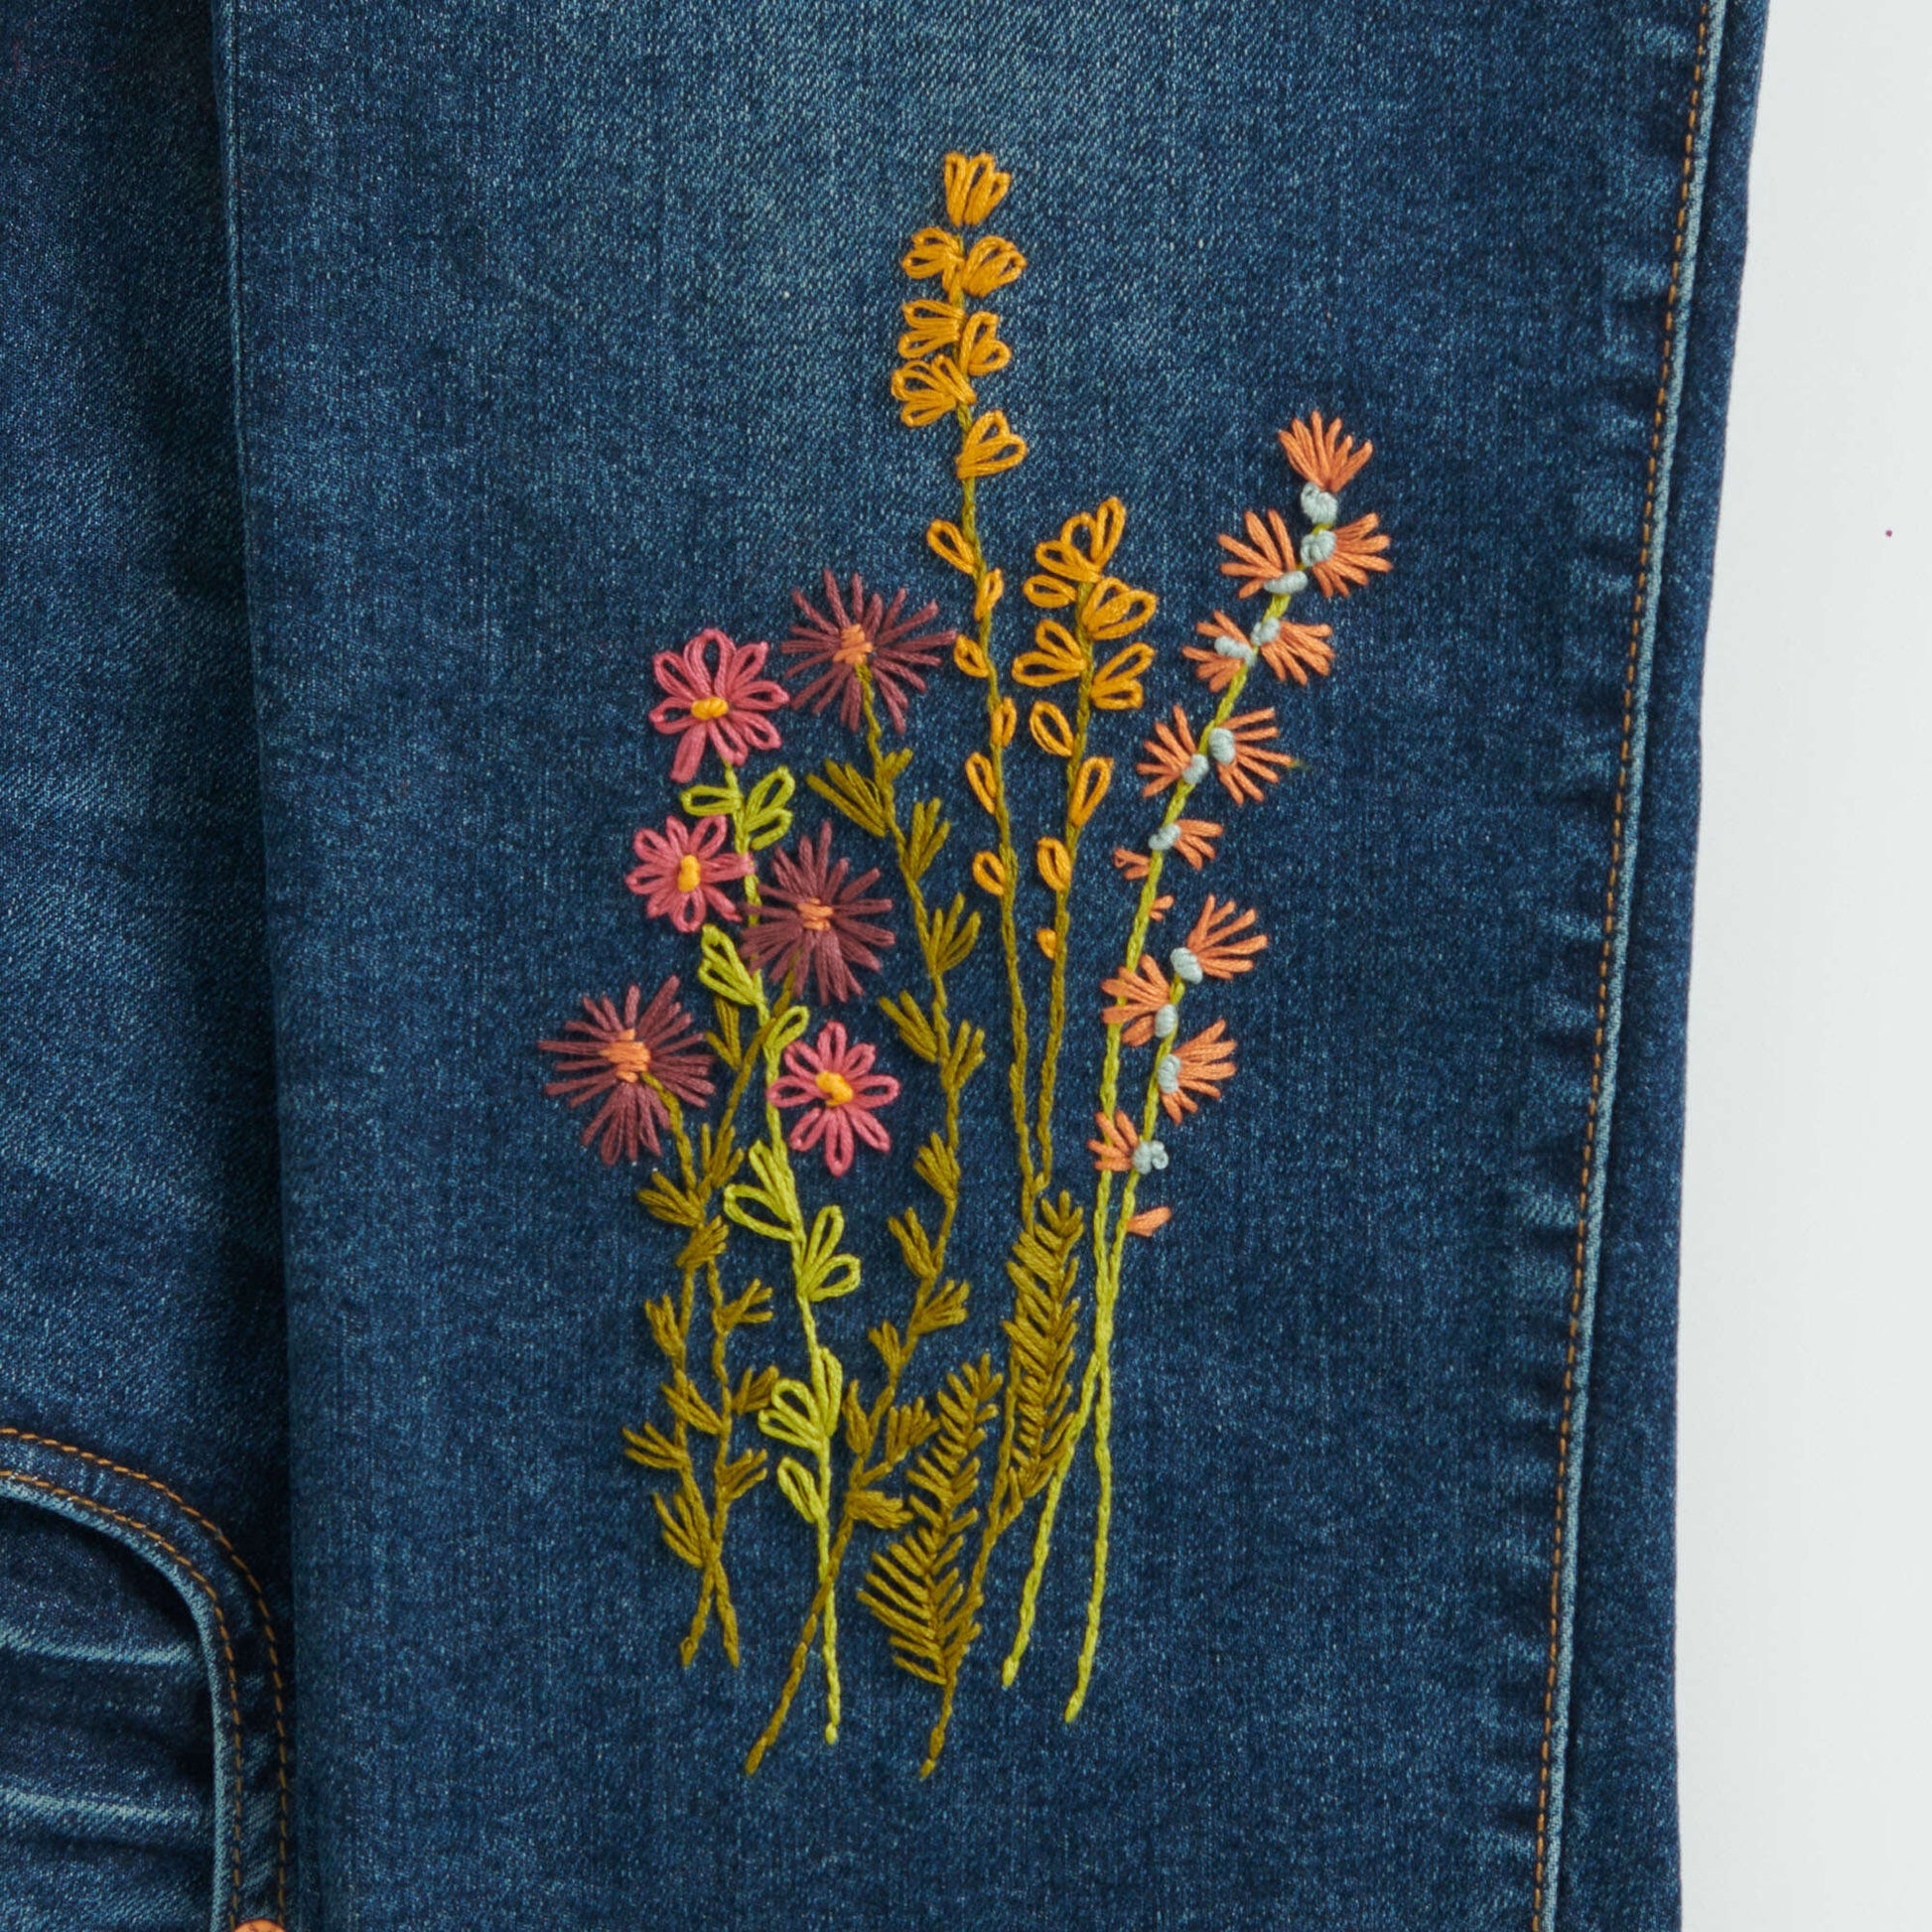 Anchor Hand Embroidery On Jeans Pattern | Yarnspirations